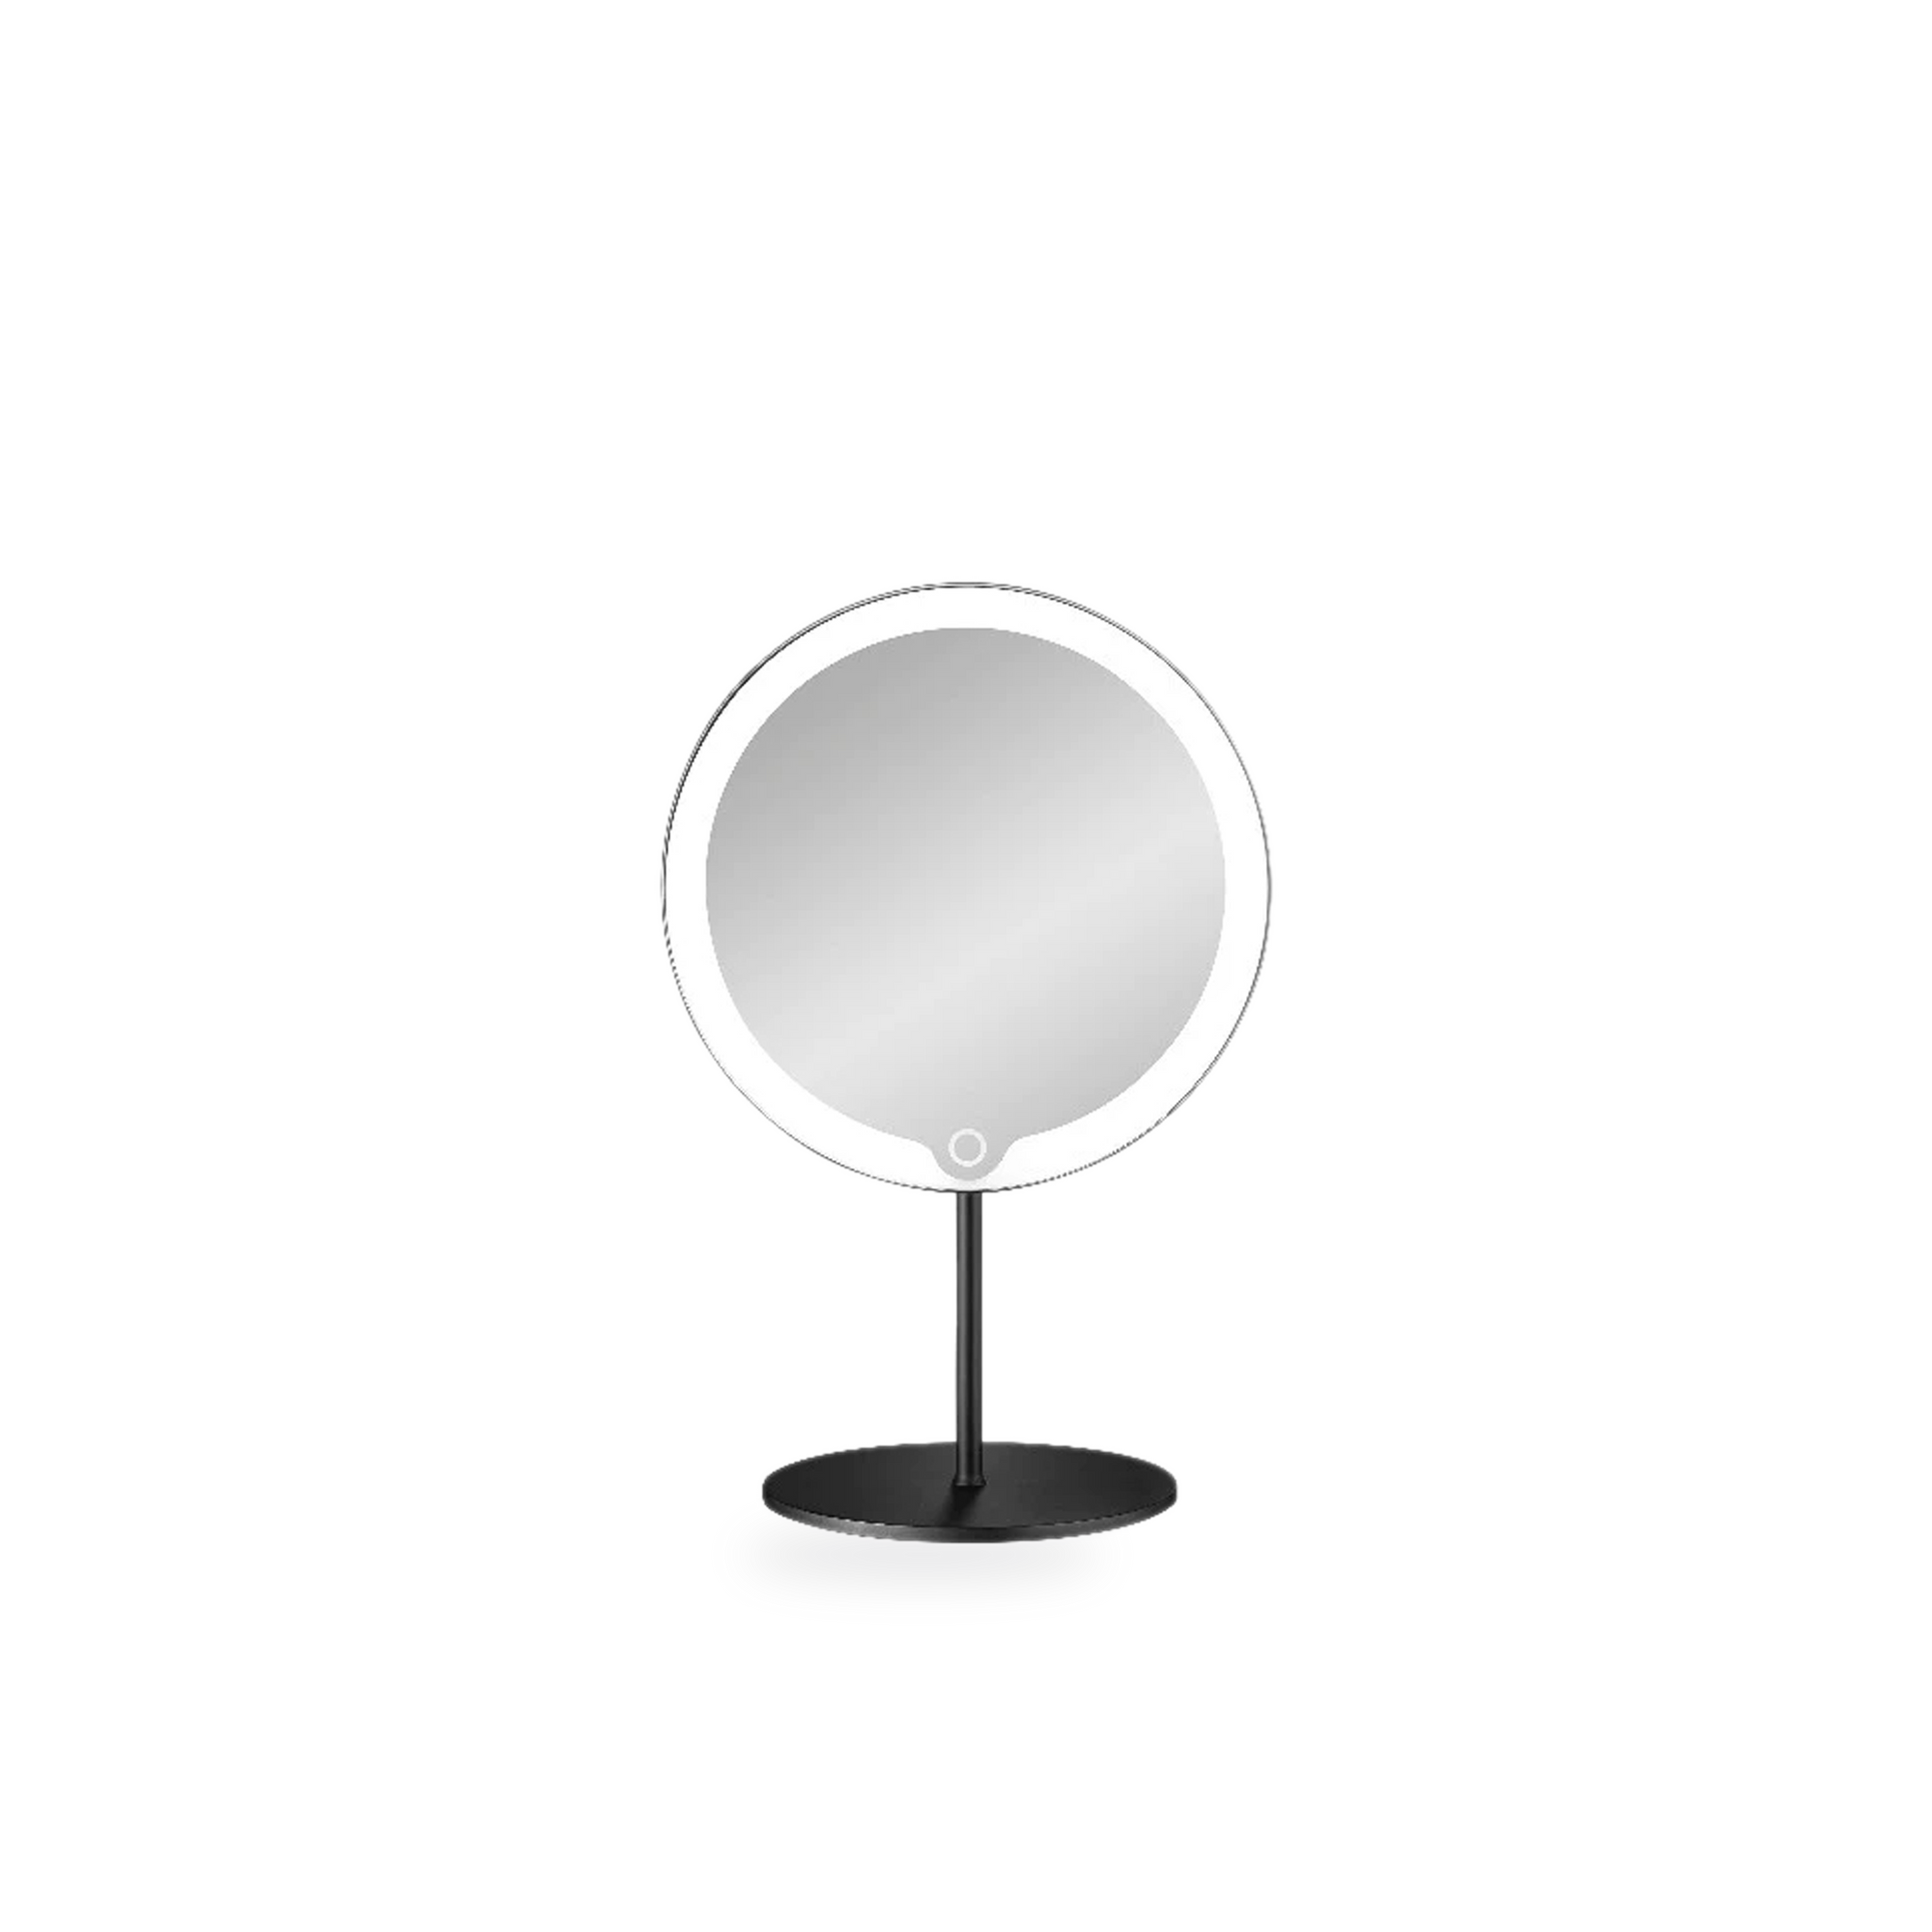 The LED Vanity Mirror provides the perfect light every time.